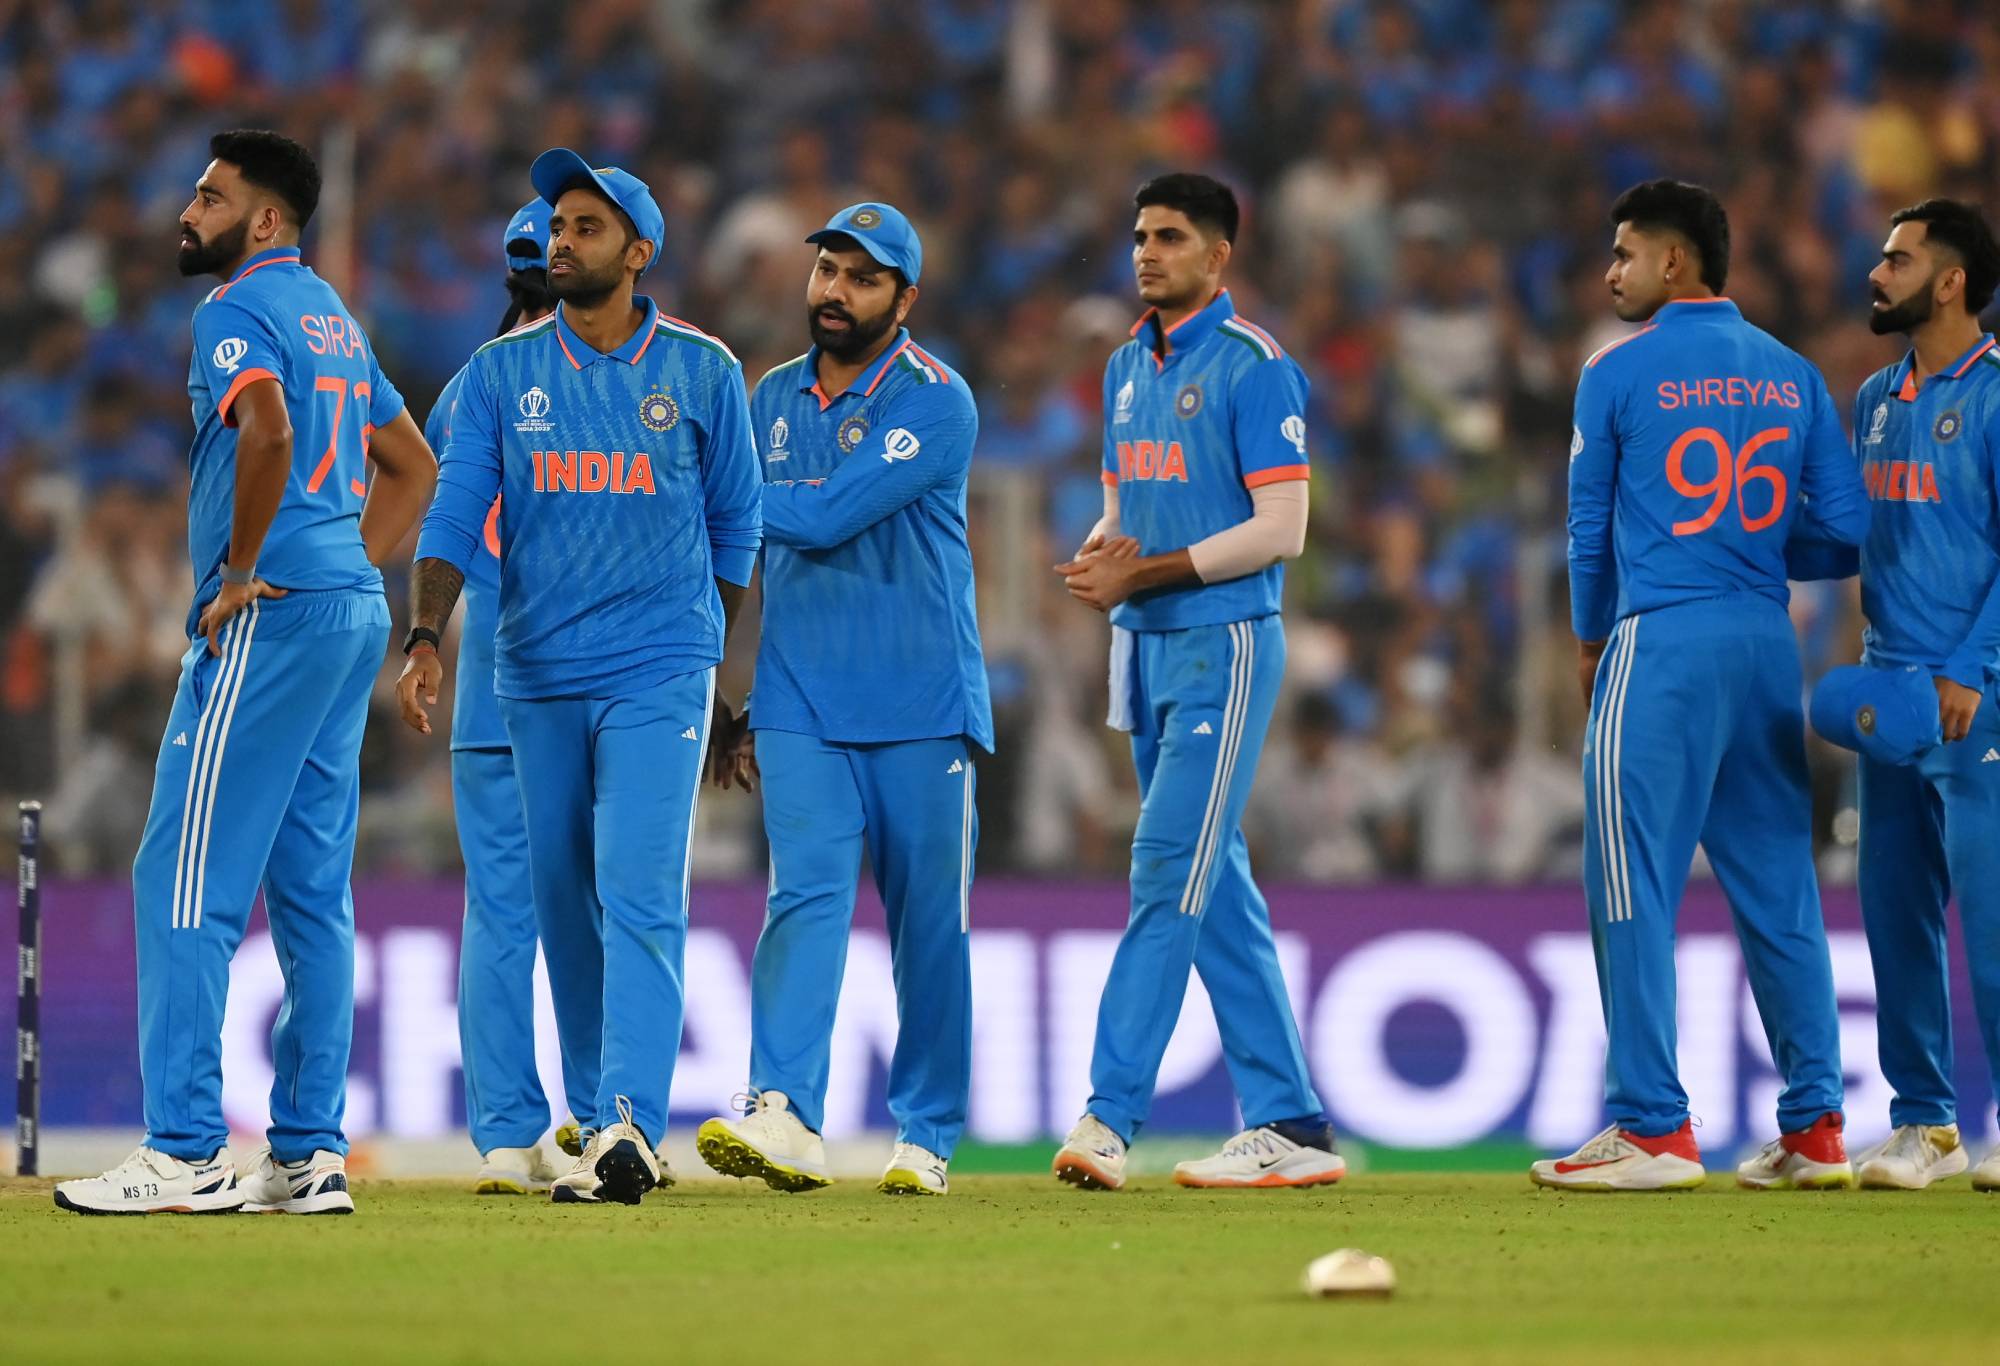 AHMEDABAD, INDIA - NOVEMBER 19: Players of India cut dejected figures following the ICC Men's Cricket World Cup India 2023 Final between India and Australia at Narendra Modi Stadium on November 19, 2023 in Ahmedabad, India. (Photo by Alex Davidson-ICC/ICC via Getty Images)